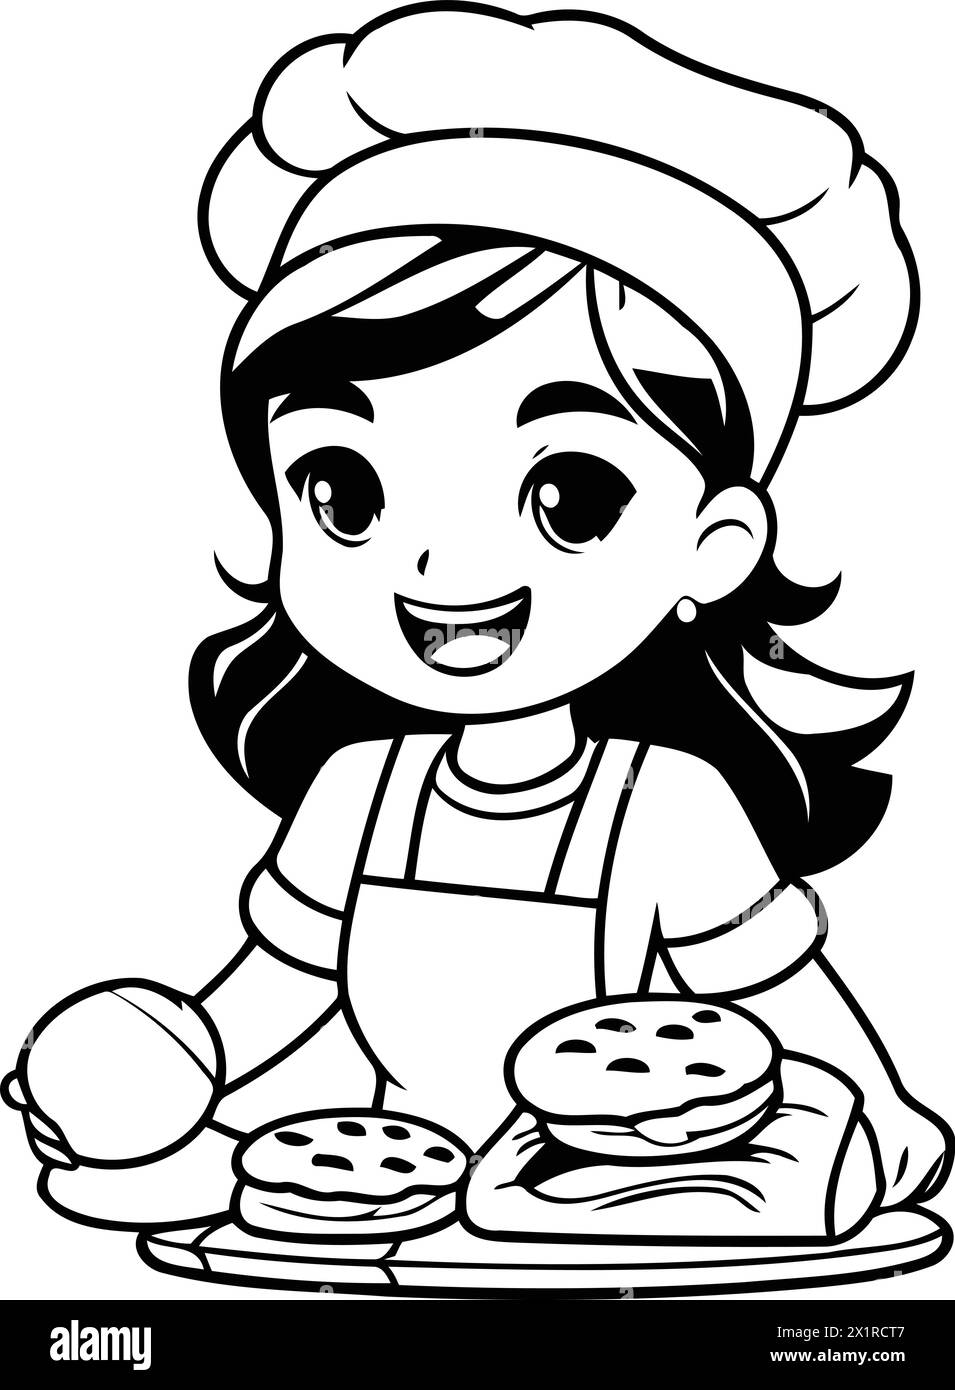 Cute little girl chef with bread and ball. Vector illustration. Stock Vector